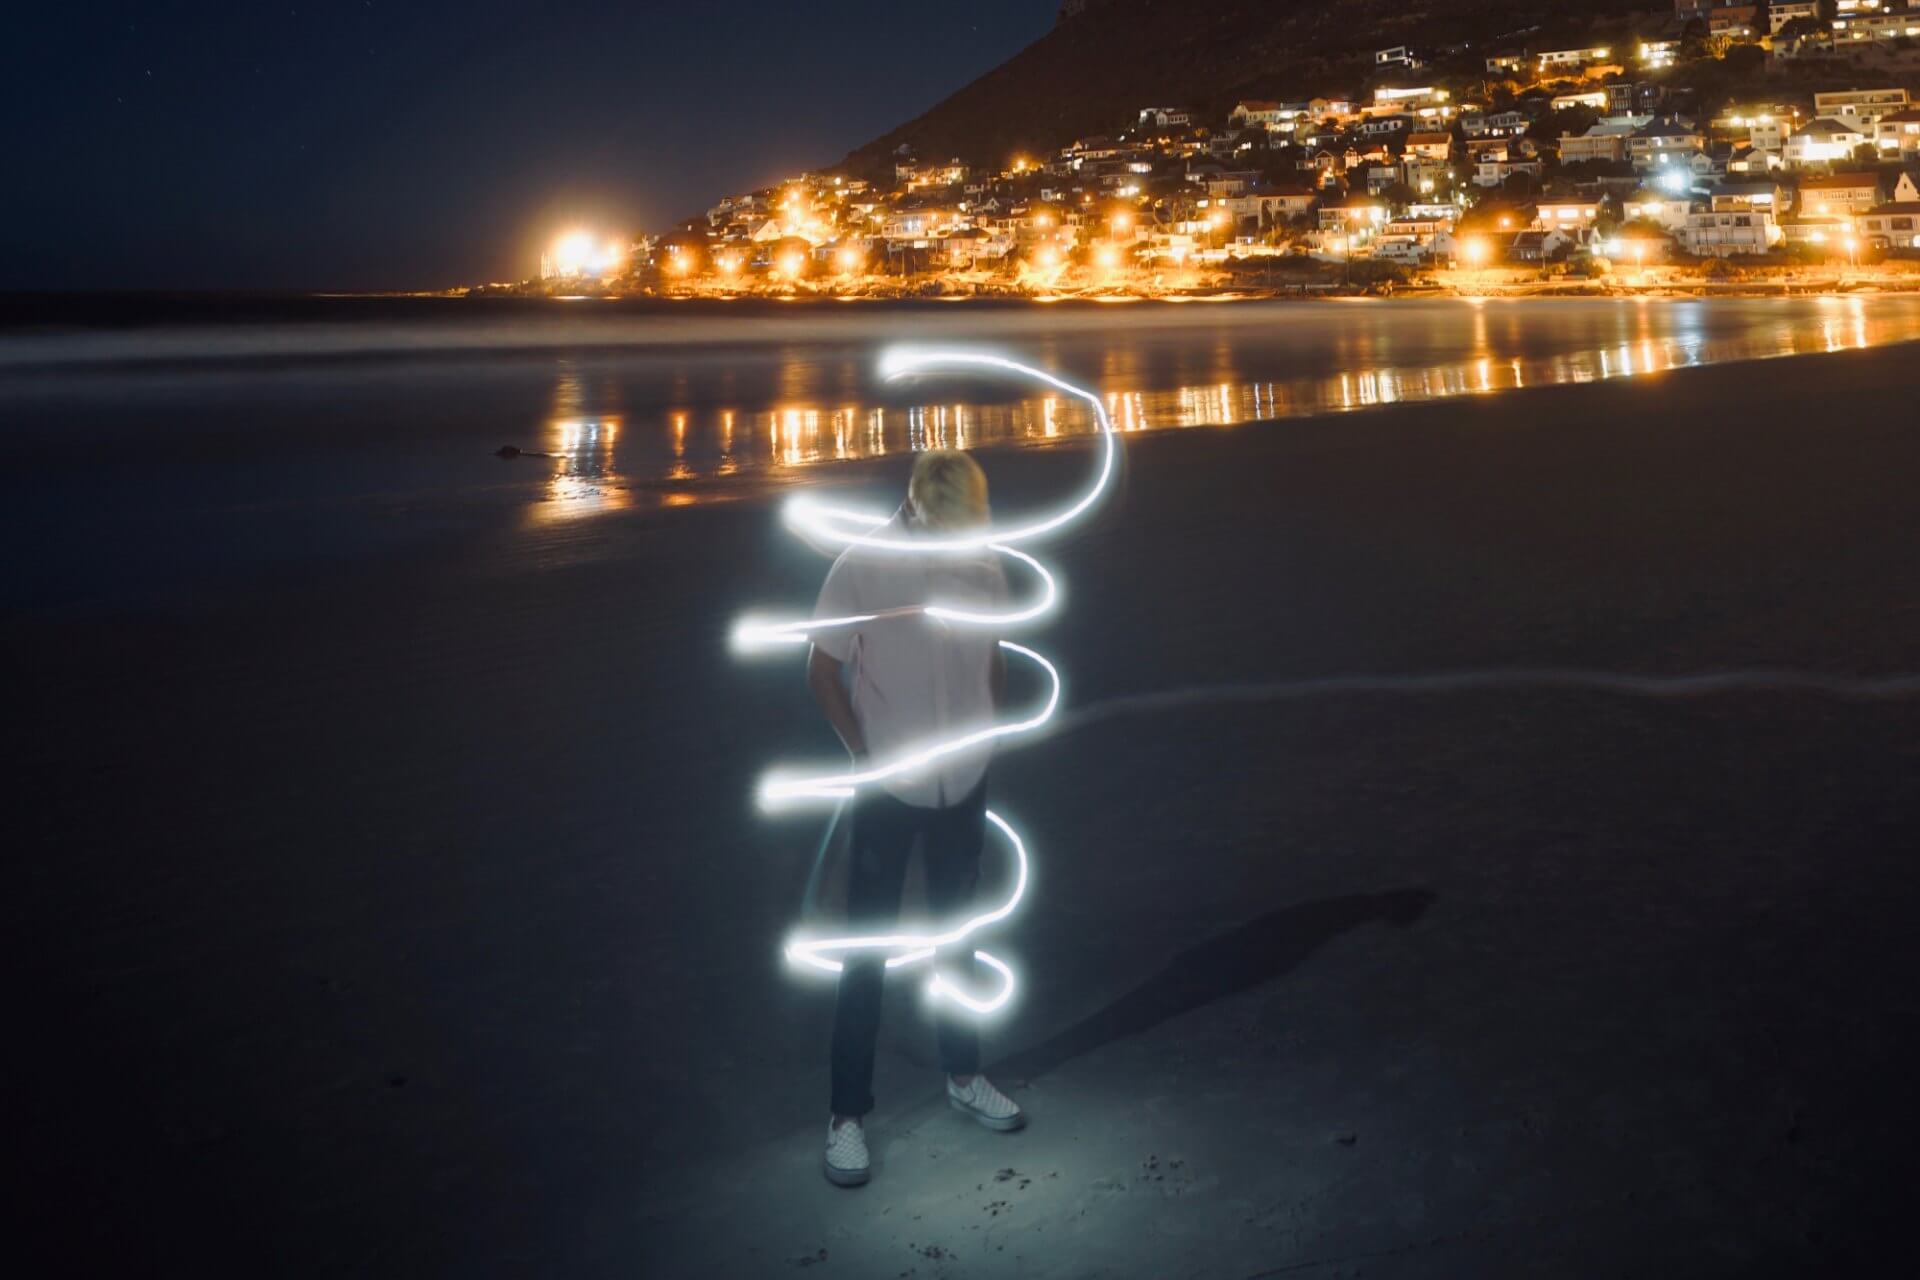 A man stands on a beach in Cape Town at night with a swirling light around him while street lights illuminate the water from across the bay. (Photo by Clayton Cardinalli on Unsplash)